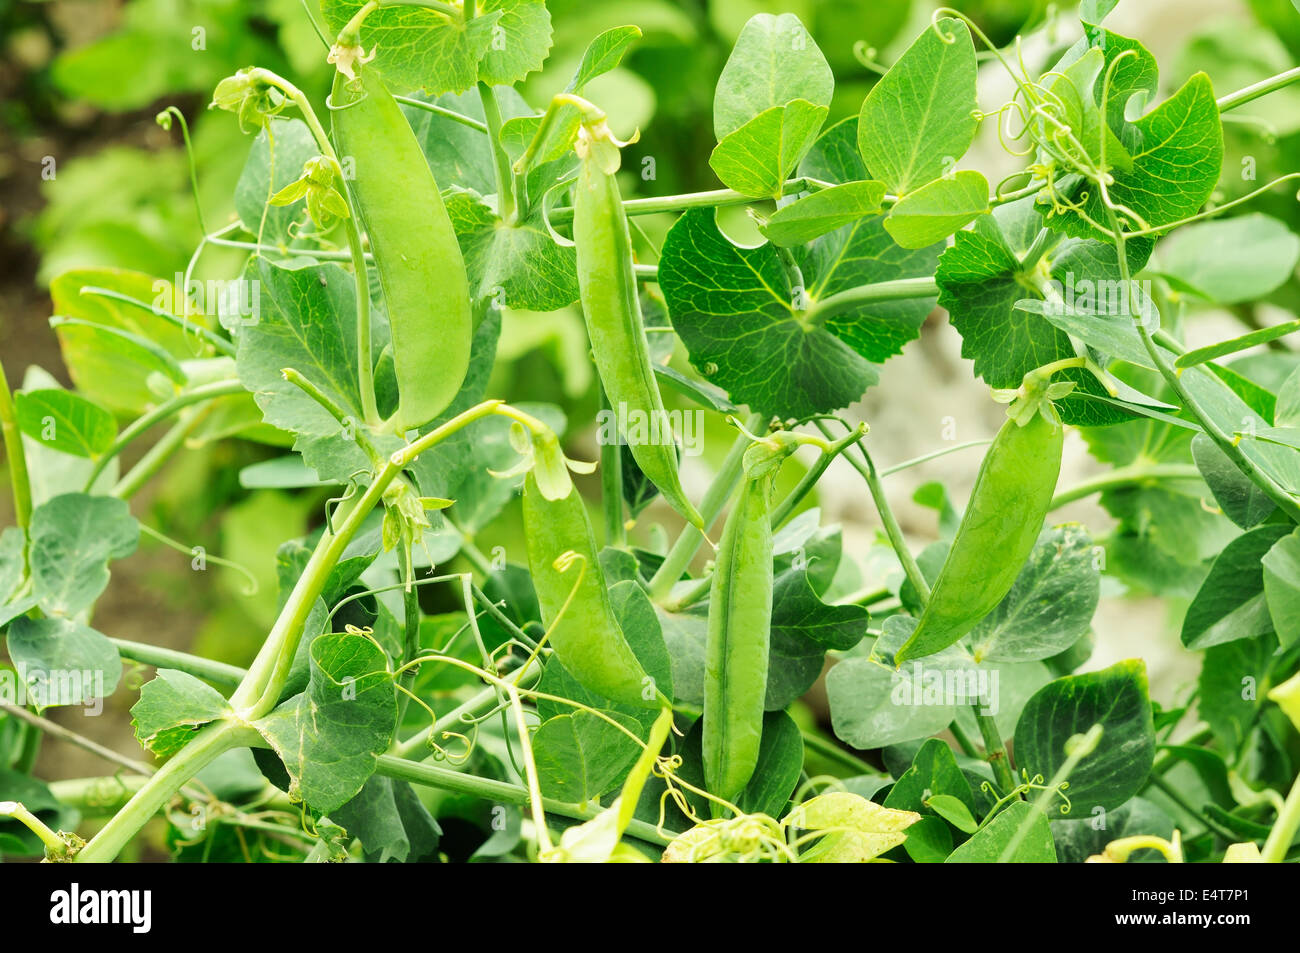 bush of peas with young pods growing Stock Photo